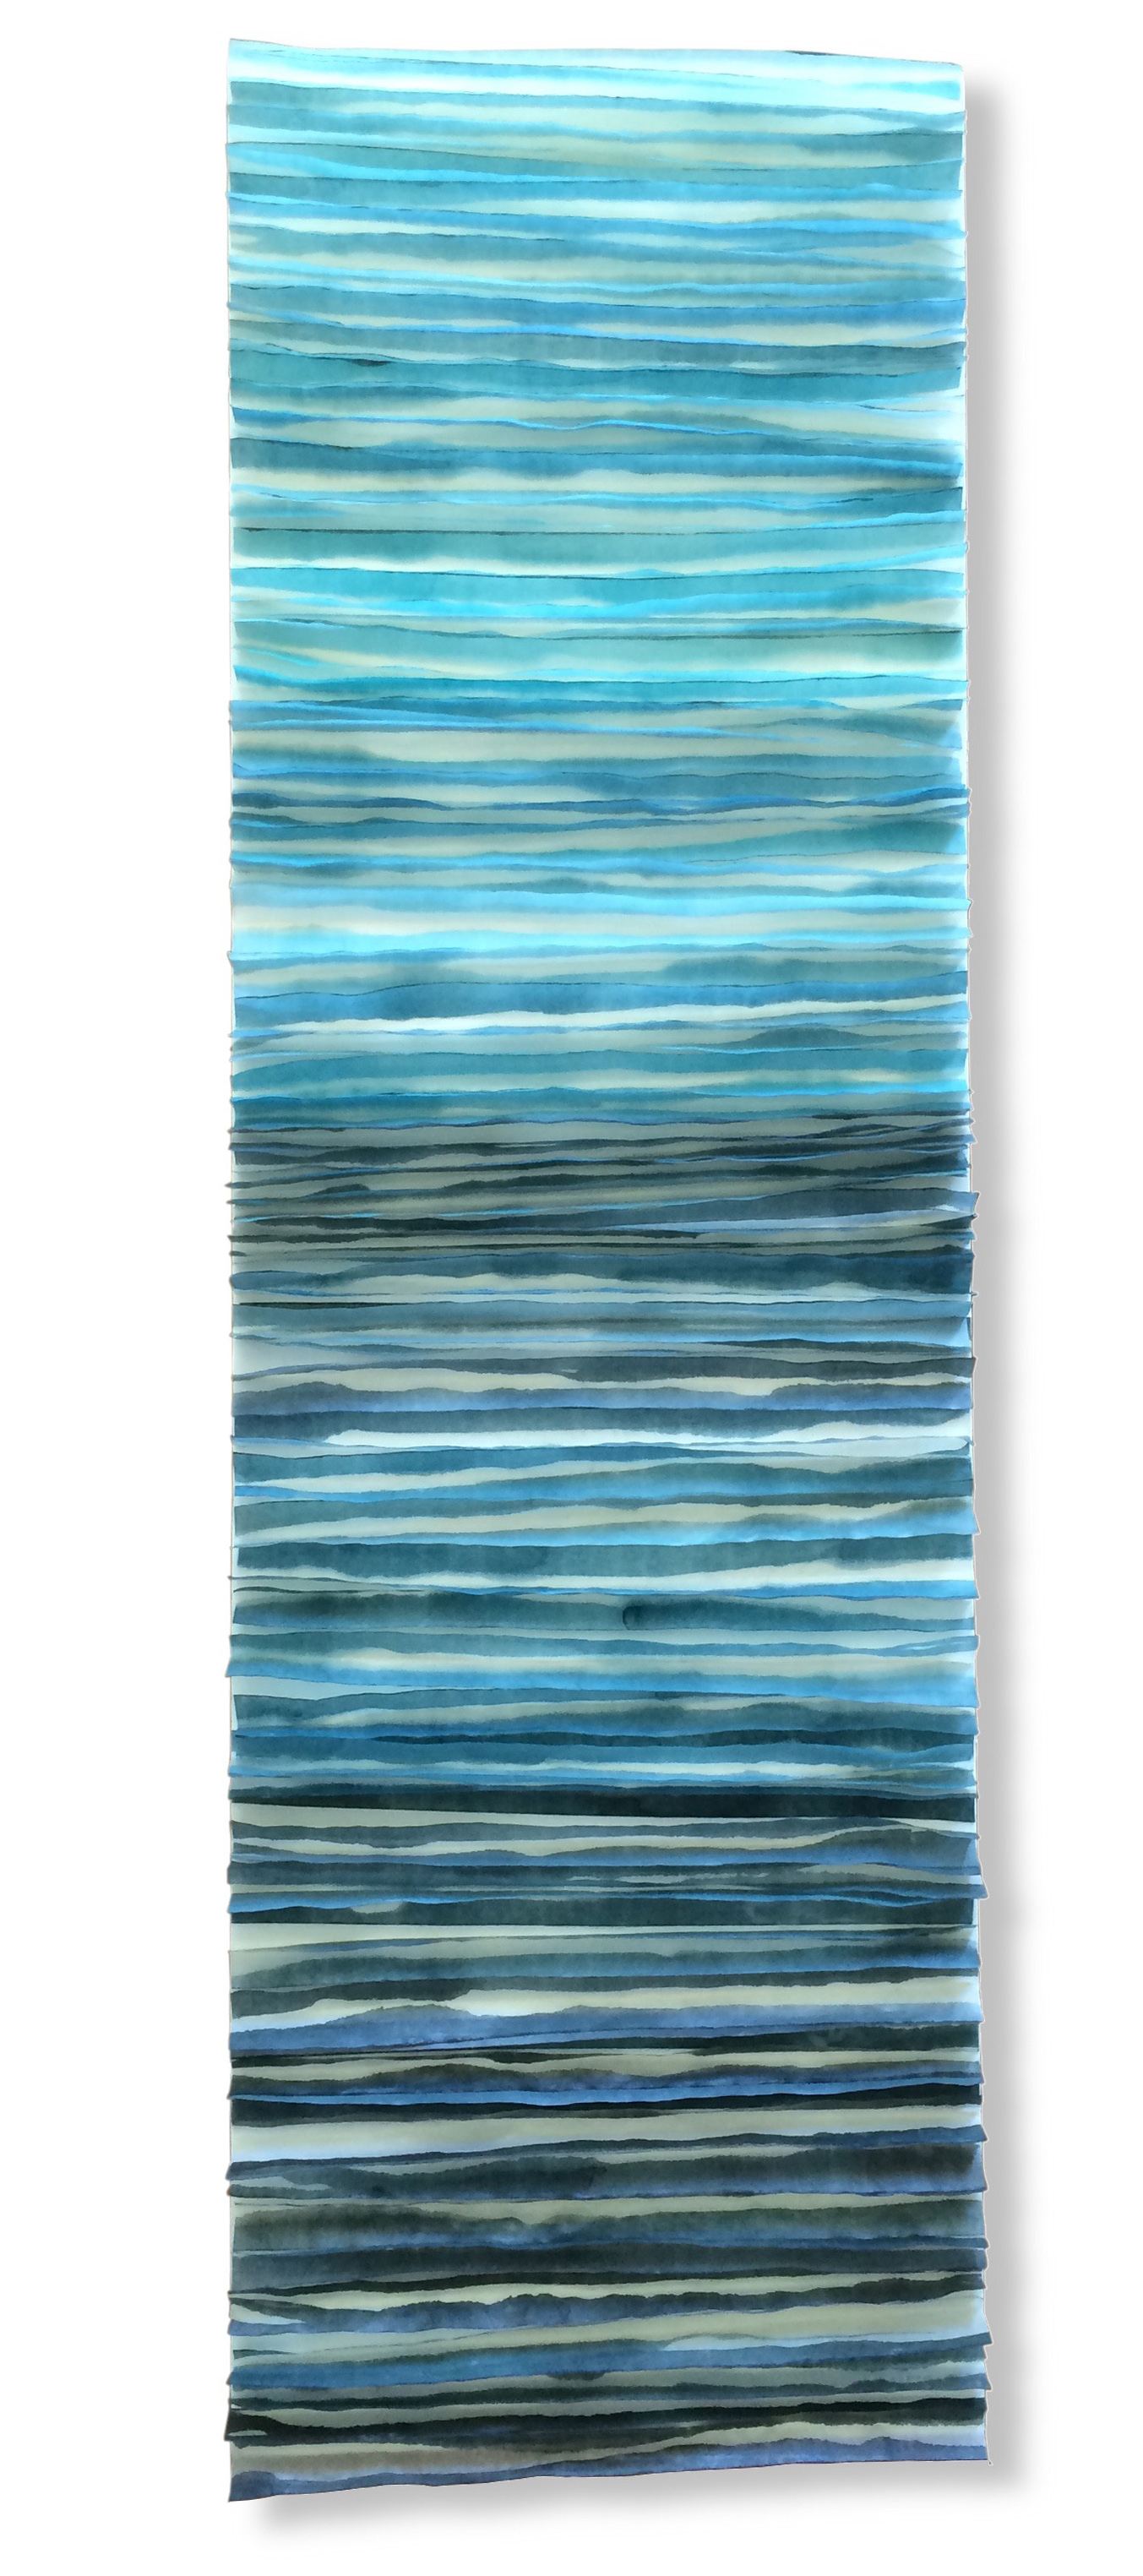  Wallow, 2016 (commission) Encaustic, Japanese Mulberry Paper, Watercolor on panel 48 x 15 x 1.5 inches  Wallow reflects the experience of being enveloped by water.  Layers of paper and understated color create a sense of depth whose appearance goes 